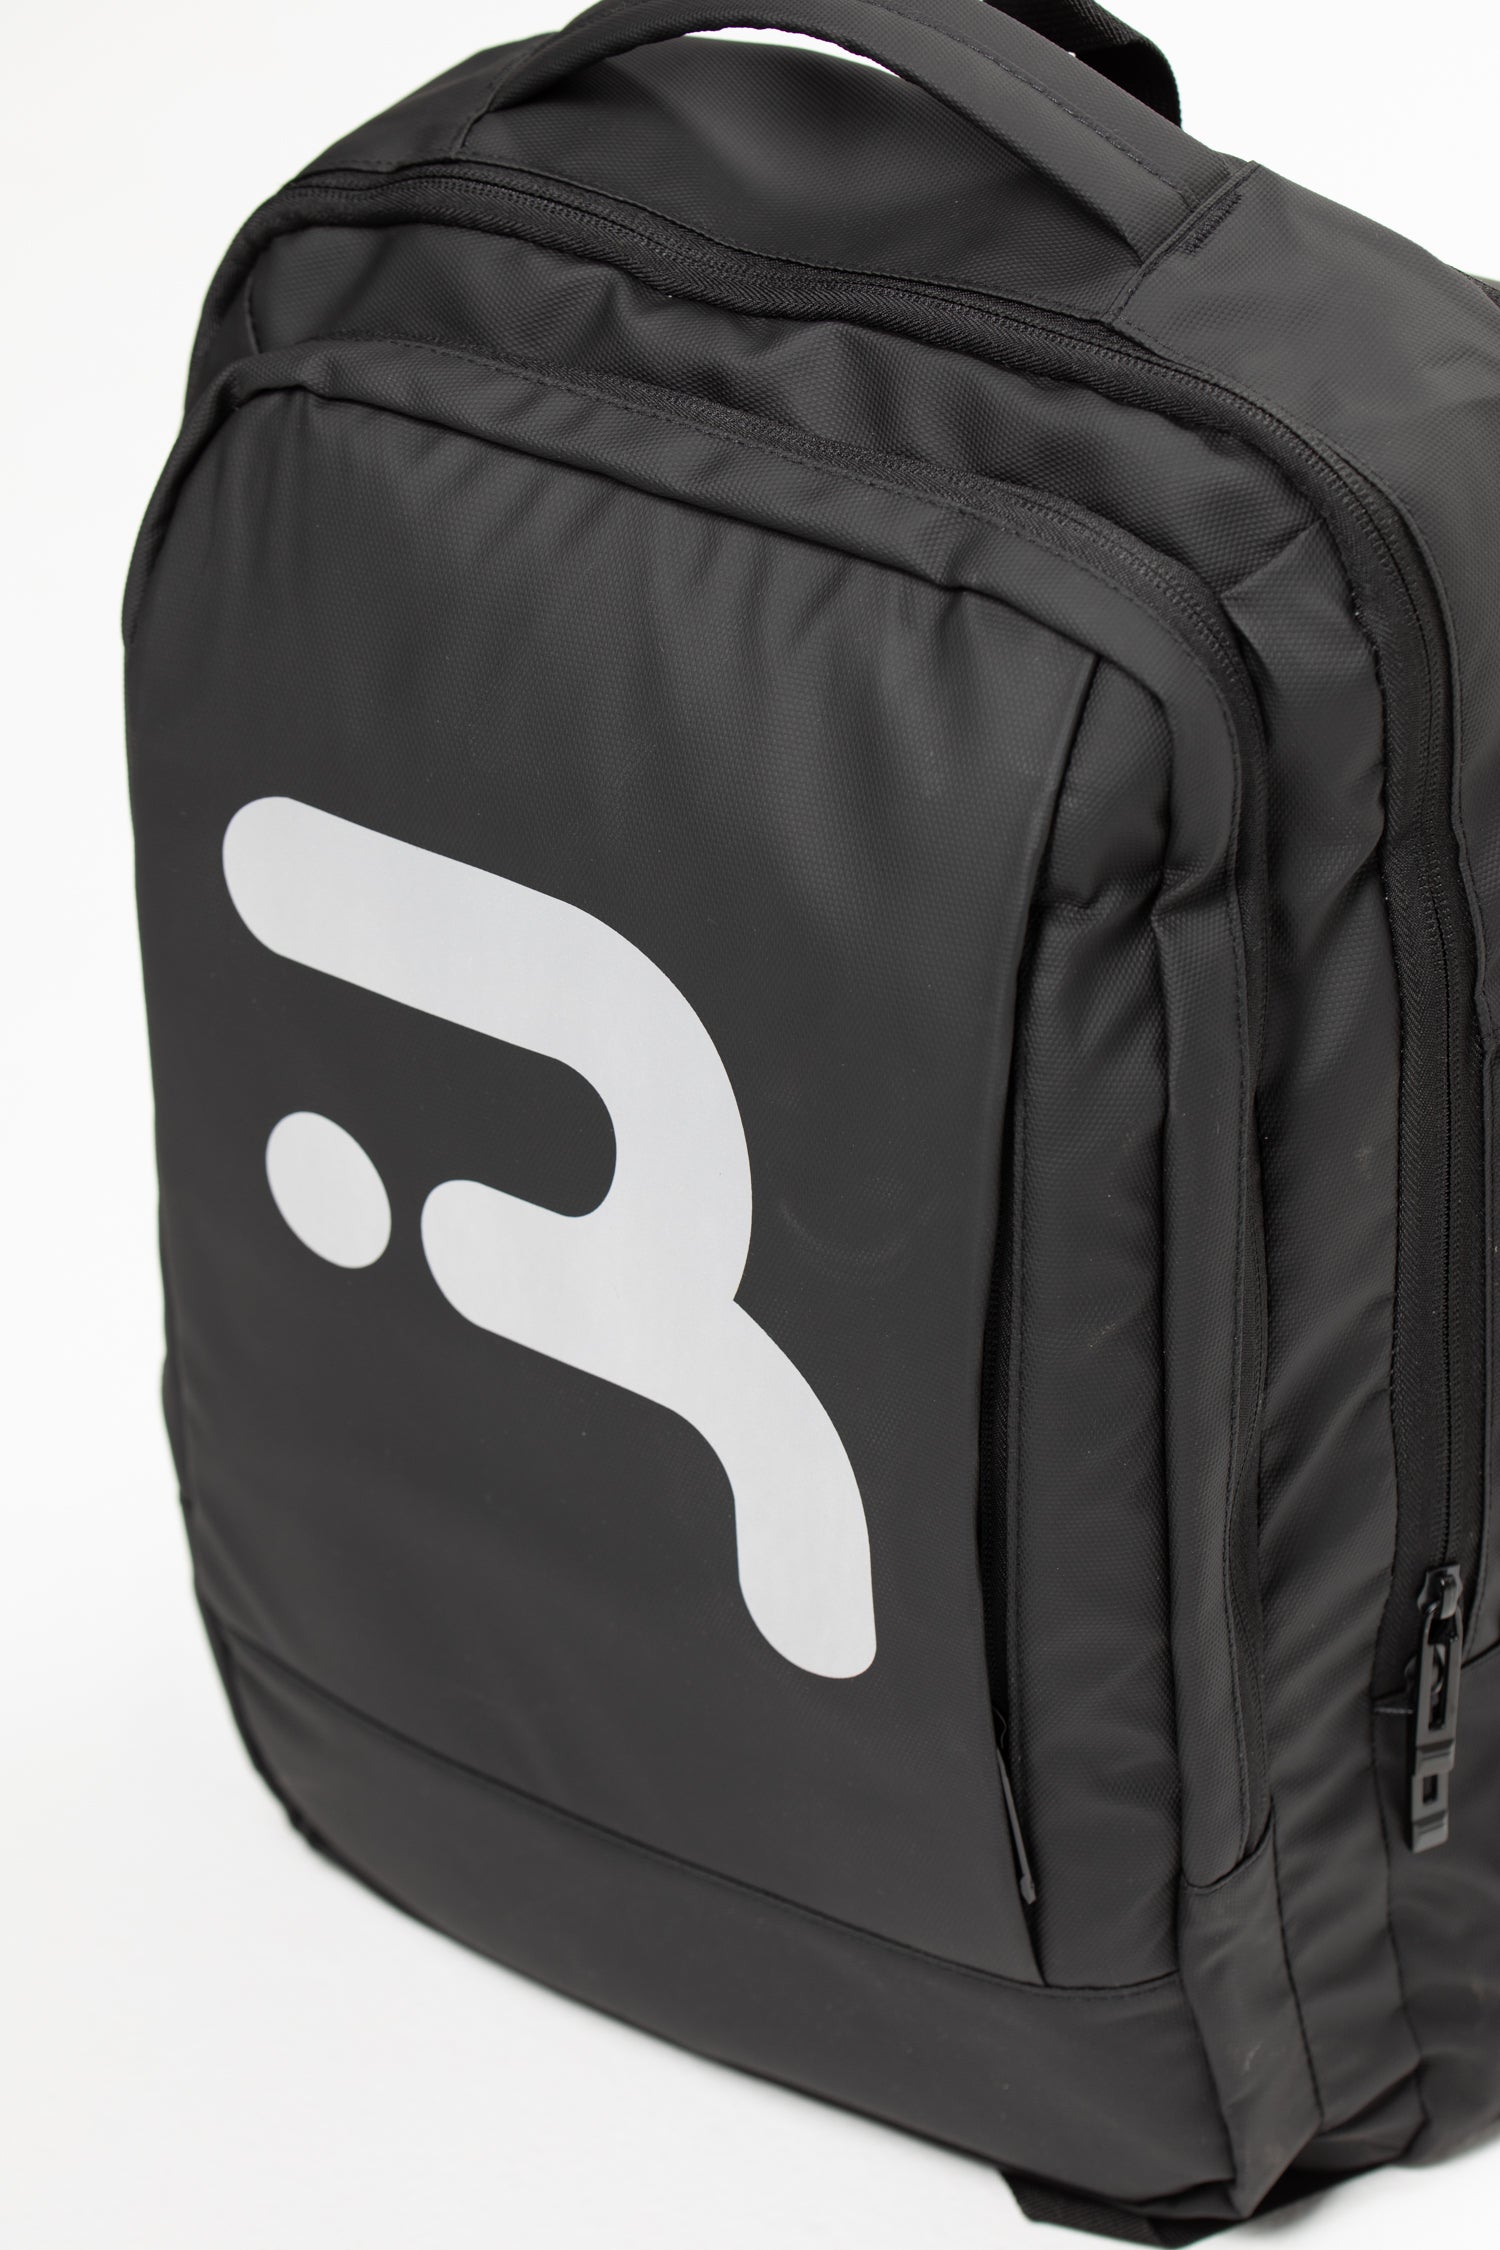 The Recovery Project Backpack